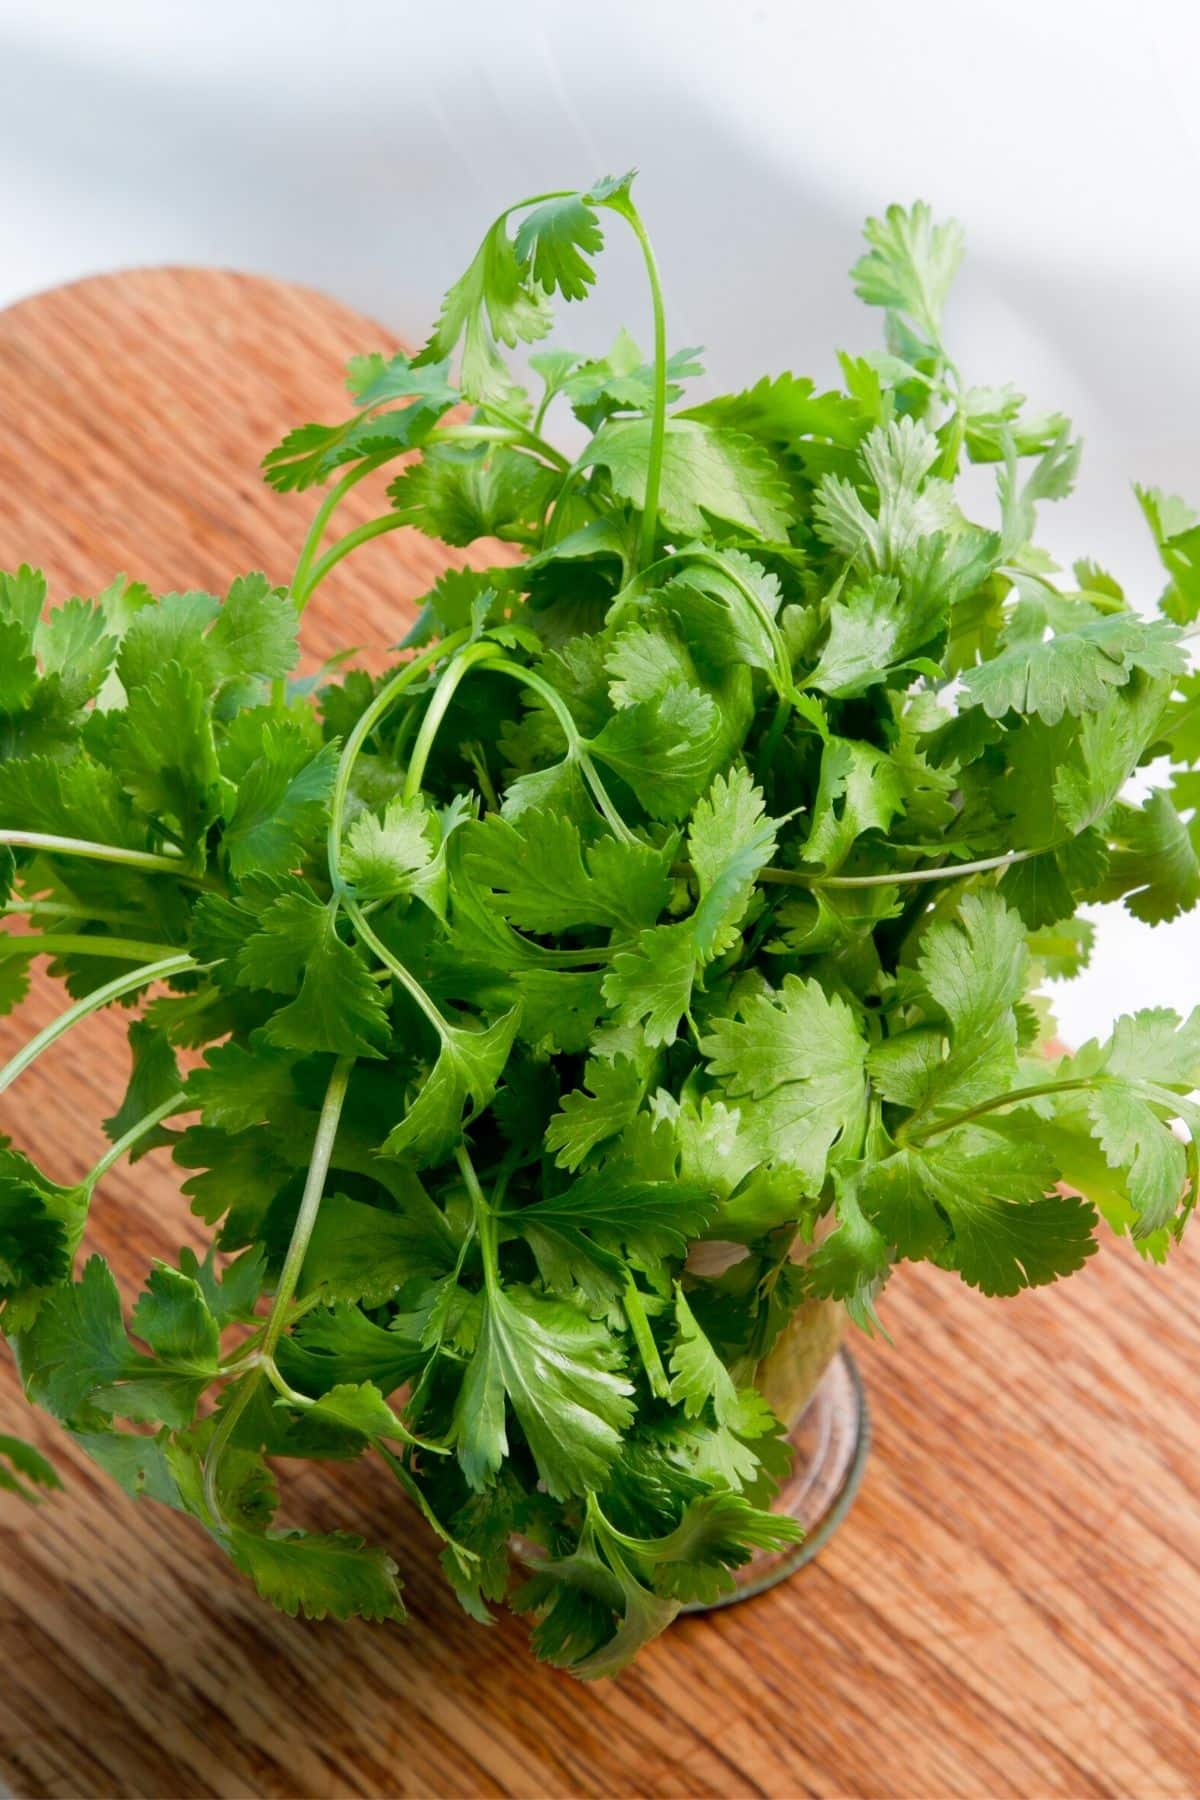 cilantro in bunch on table.